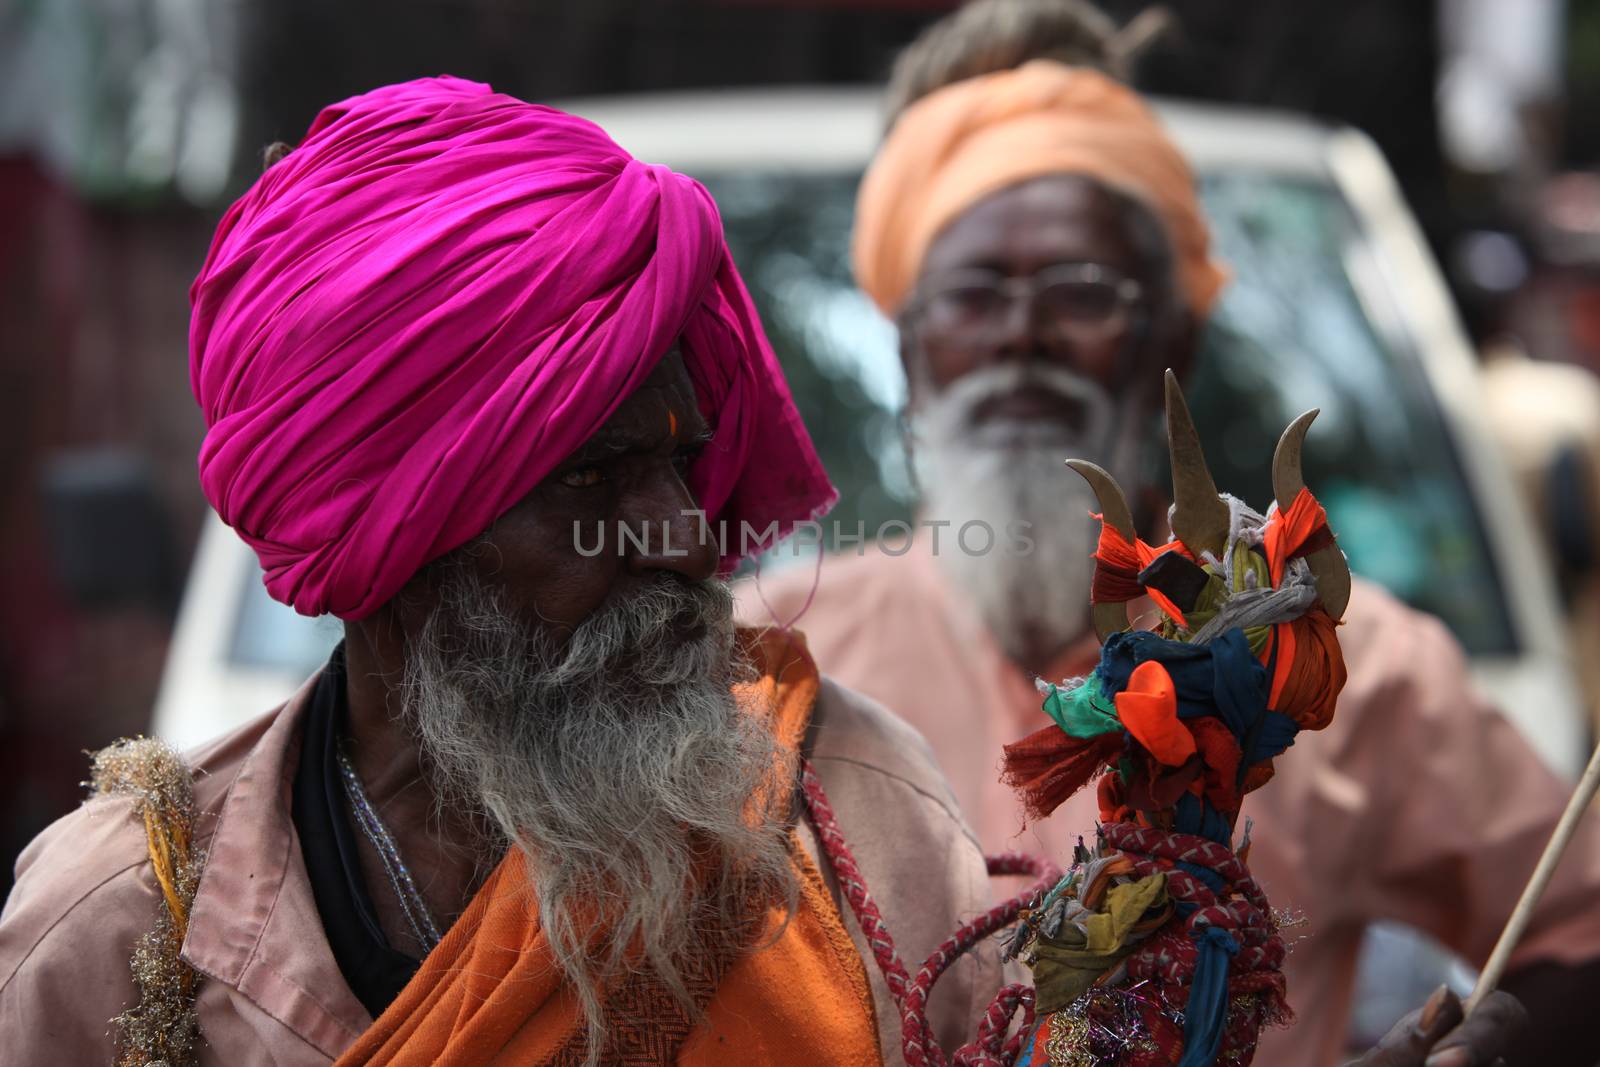 Pune, India - July 11, 2015: An old Indian pilgrim, a devotee of Lord Shiva during an Indian pilgrimmage.